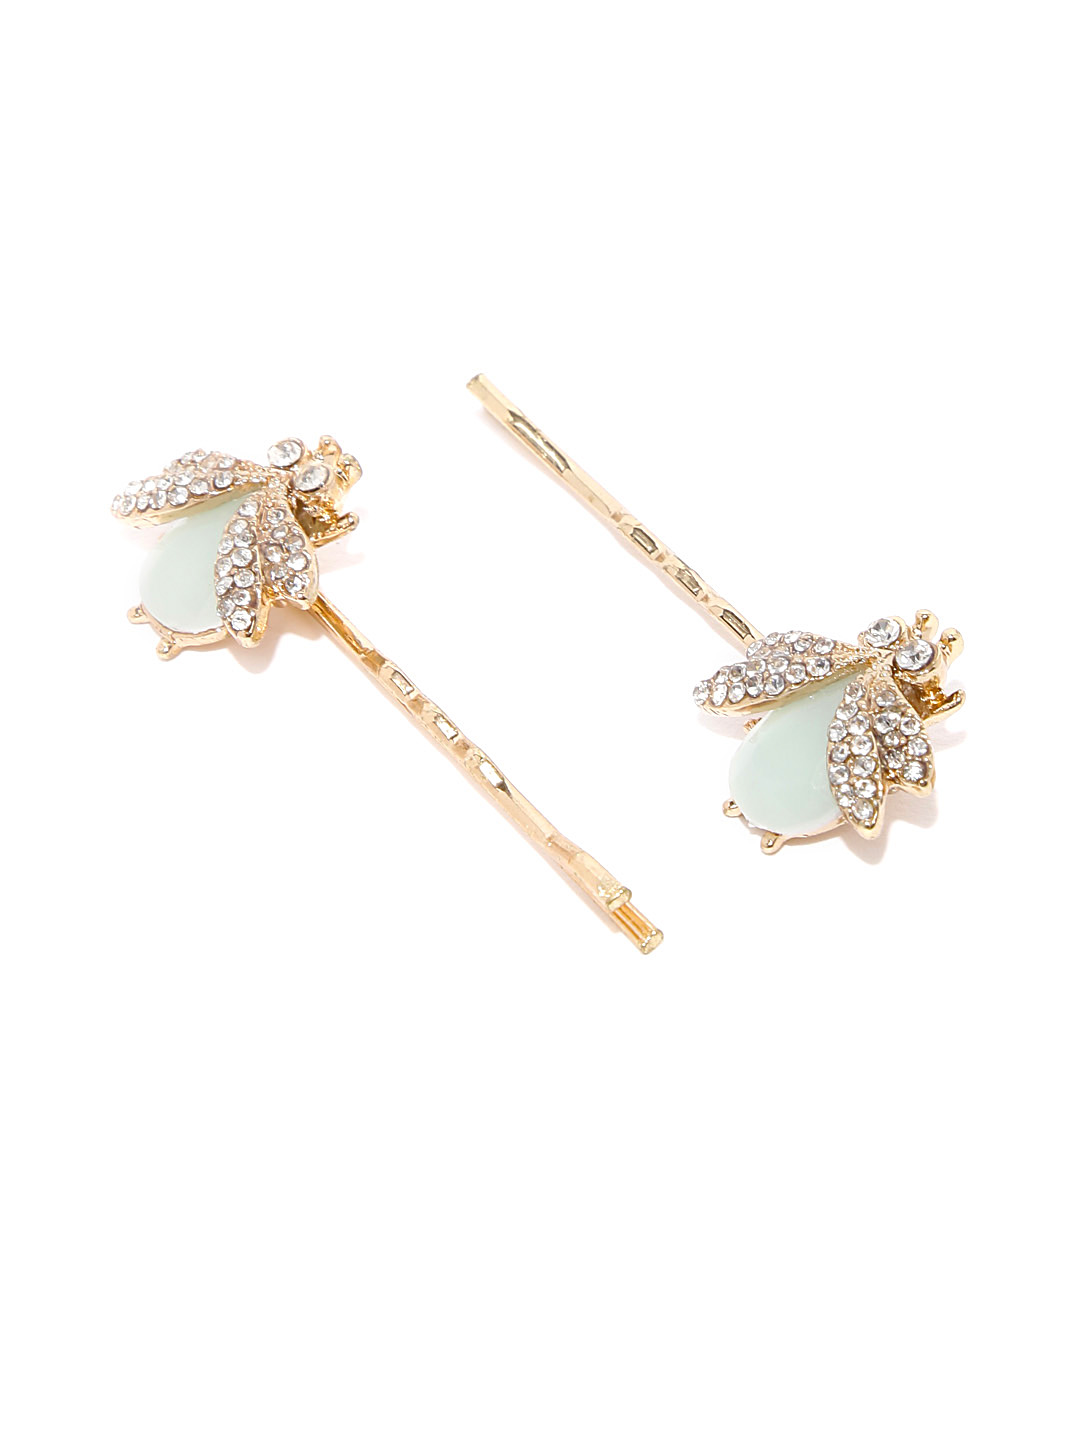 Accessorize Set of 2 Embellished Bobby Pins